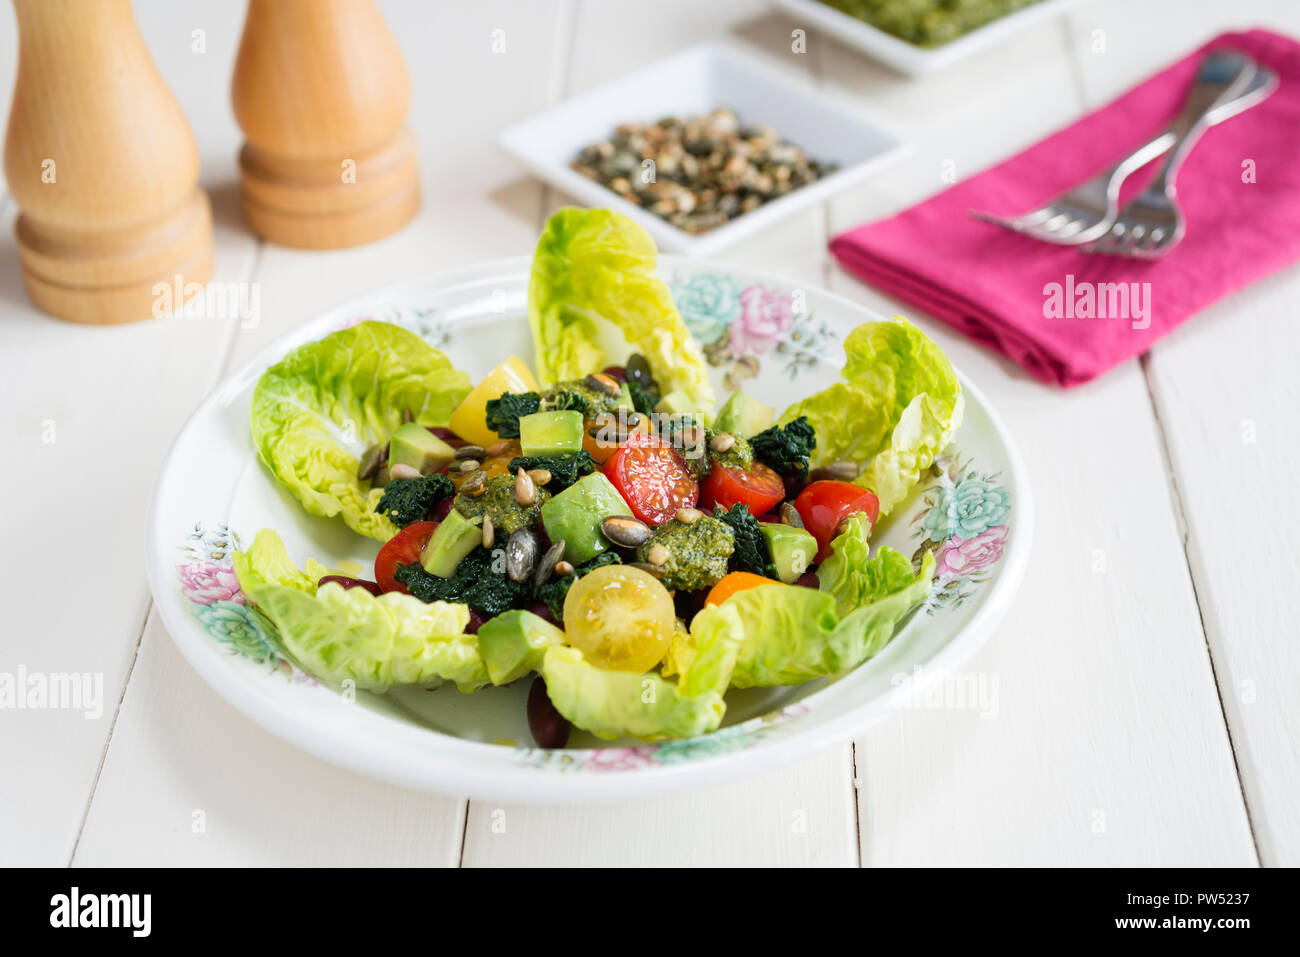 Tri-colour salad with beans, tomatoes, kale and avocado on a bed of little gem lettuce. Stock Photo